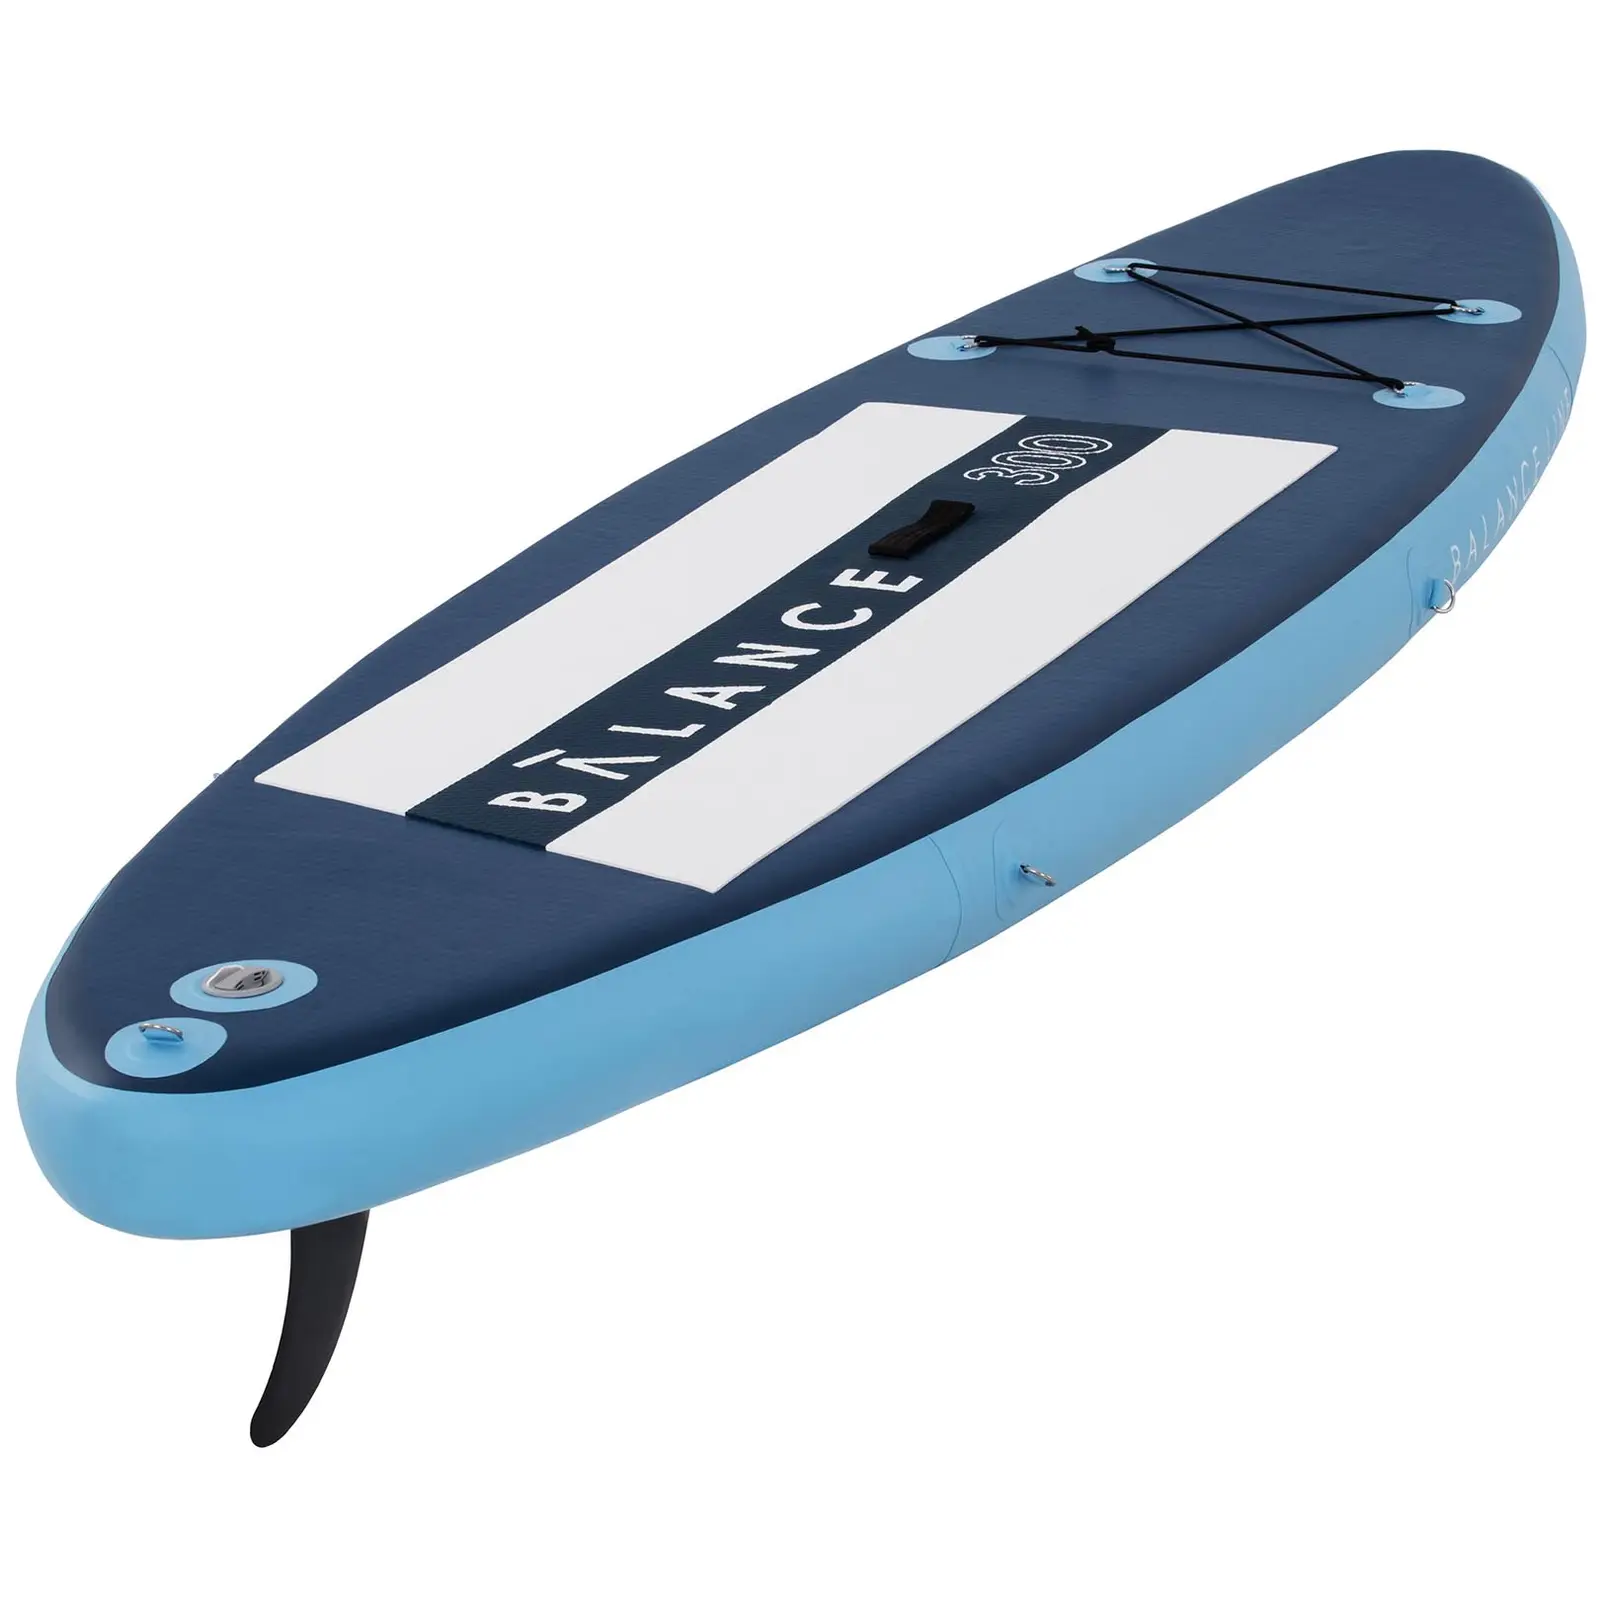 Inflatable SUP Board - 135 kg - blue/navy blue - set with paddle and accessories